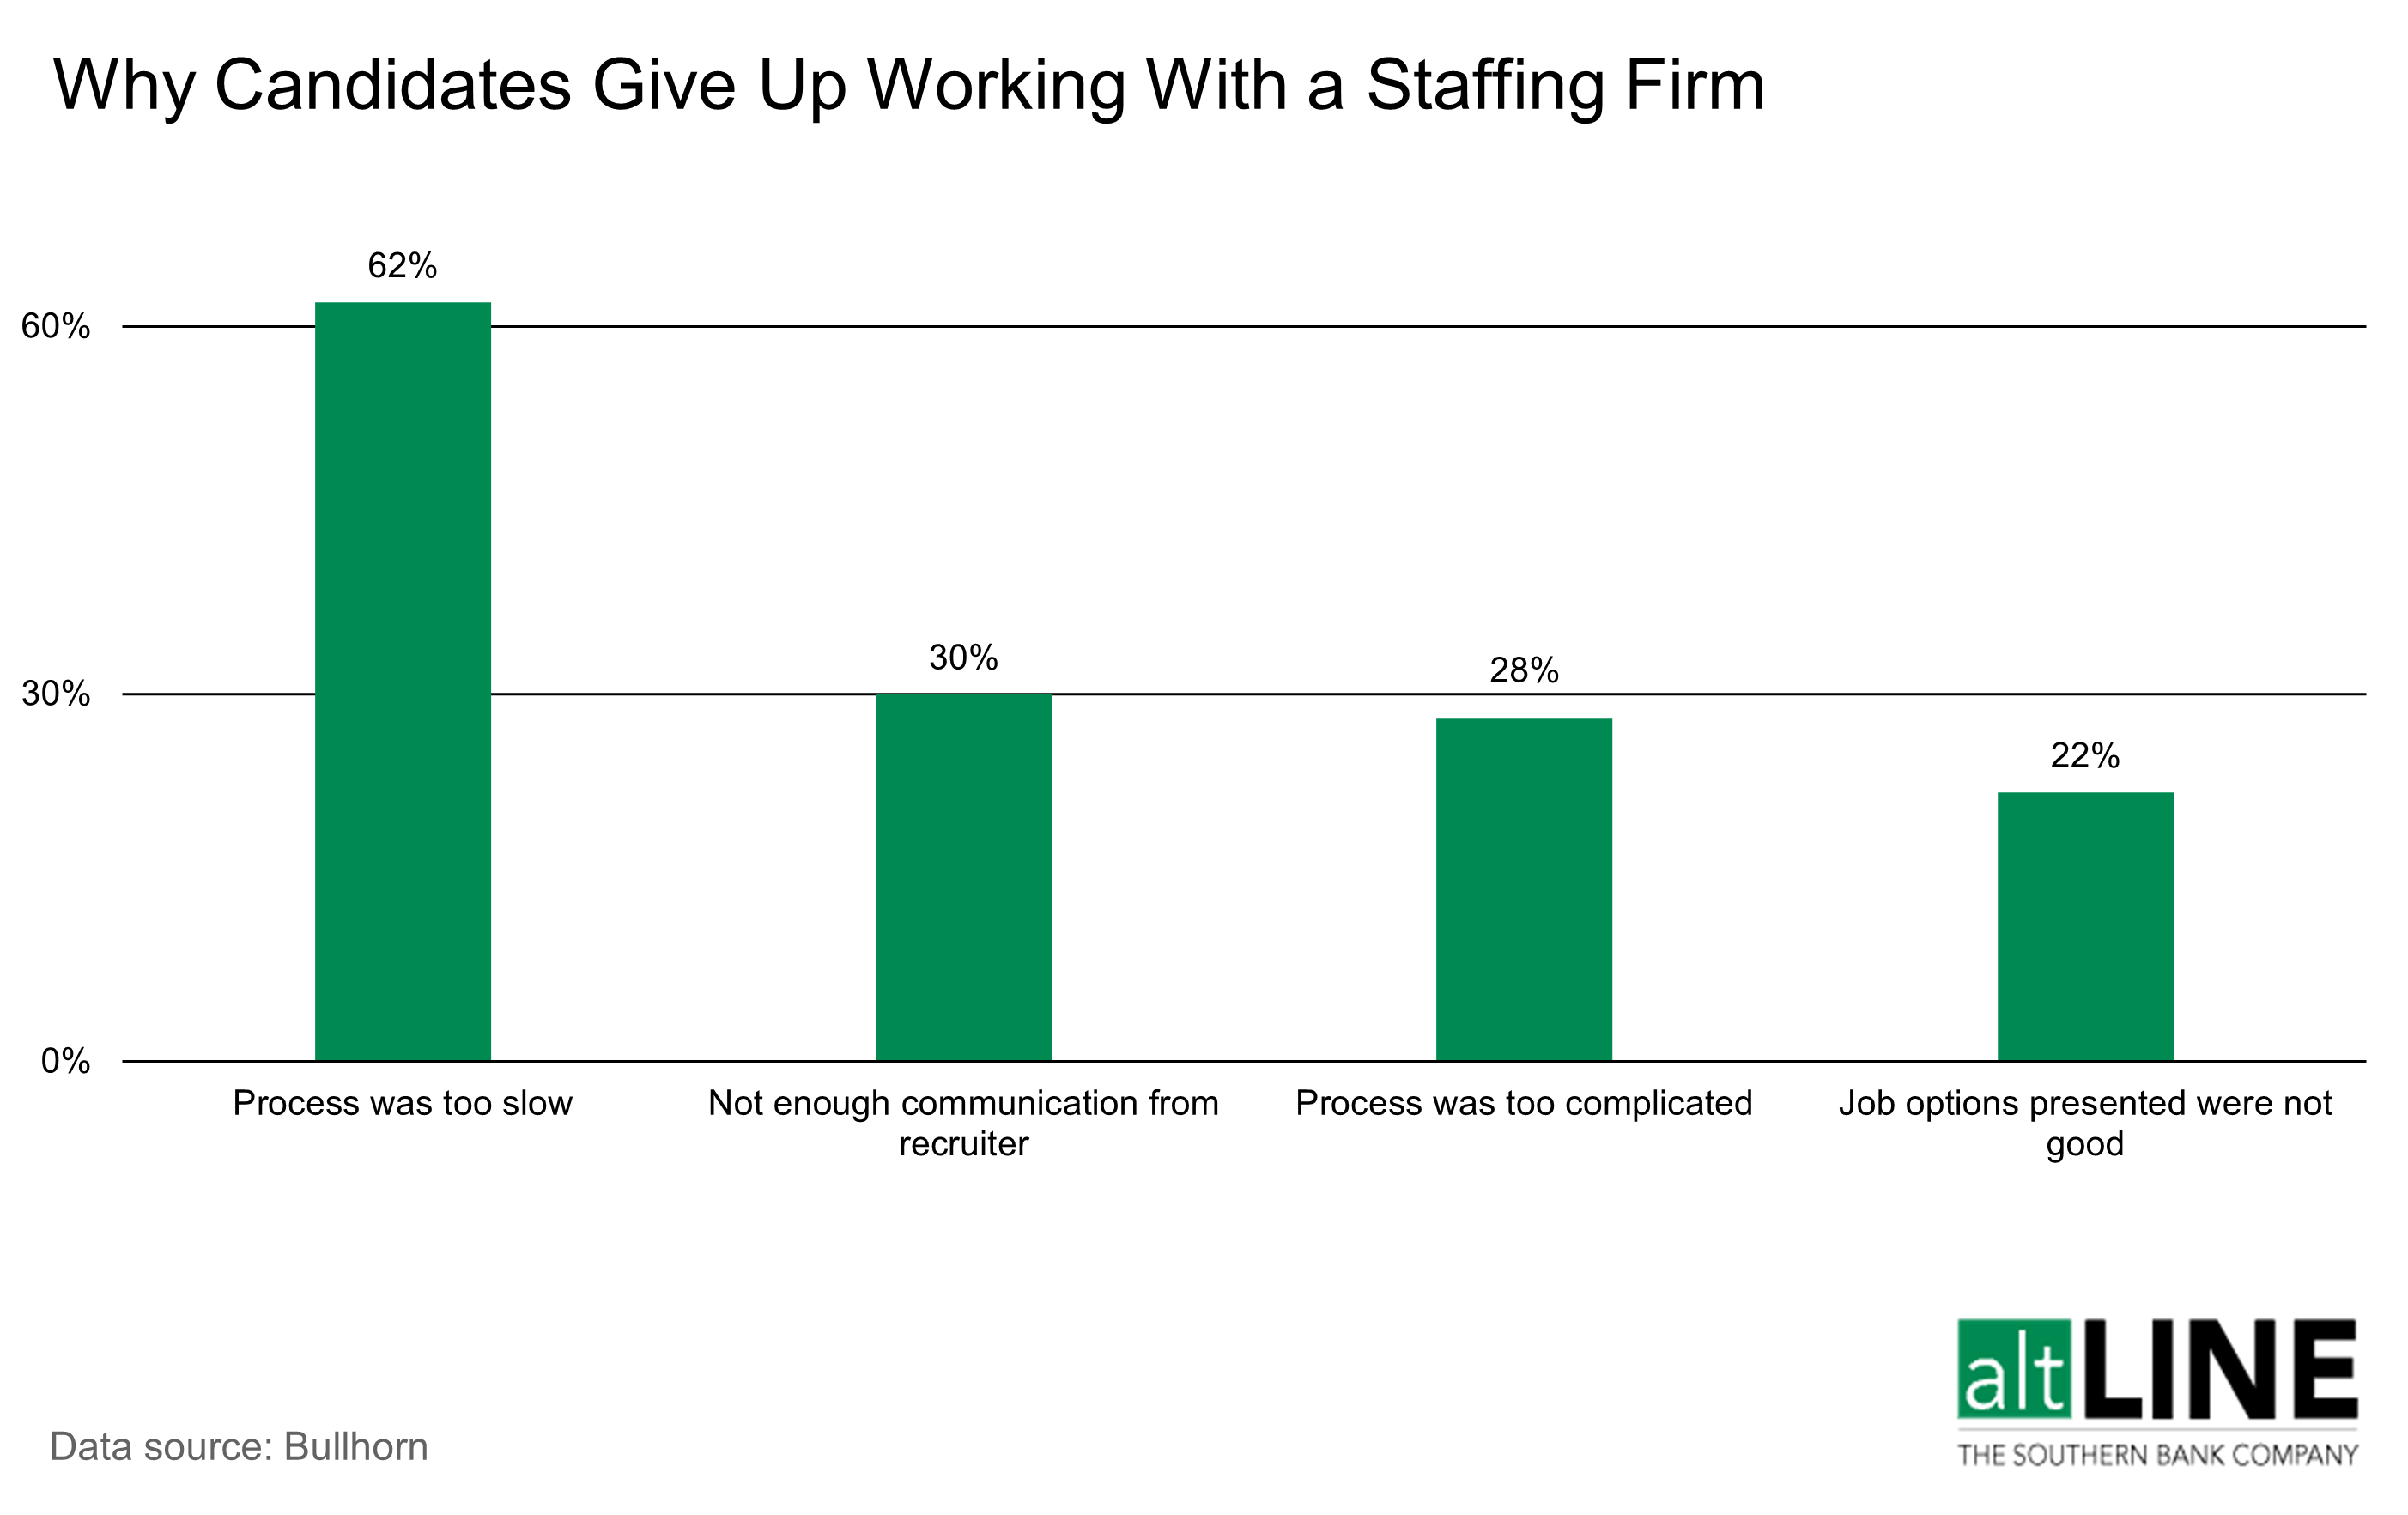 bar chart showing why candidates give up working with a staffing firm